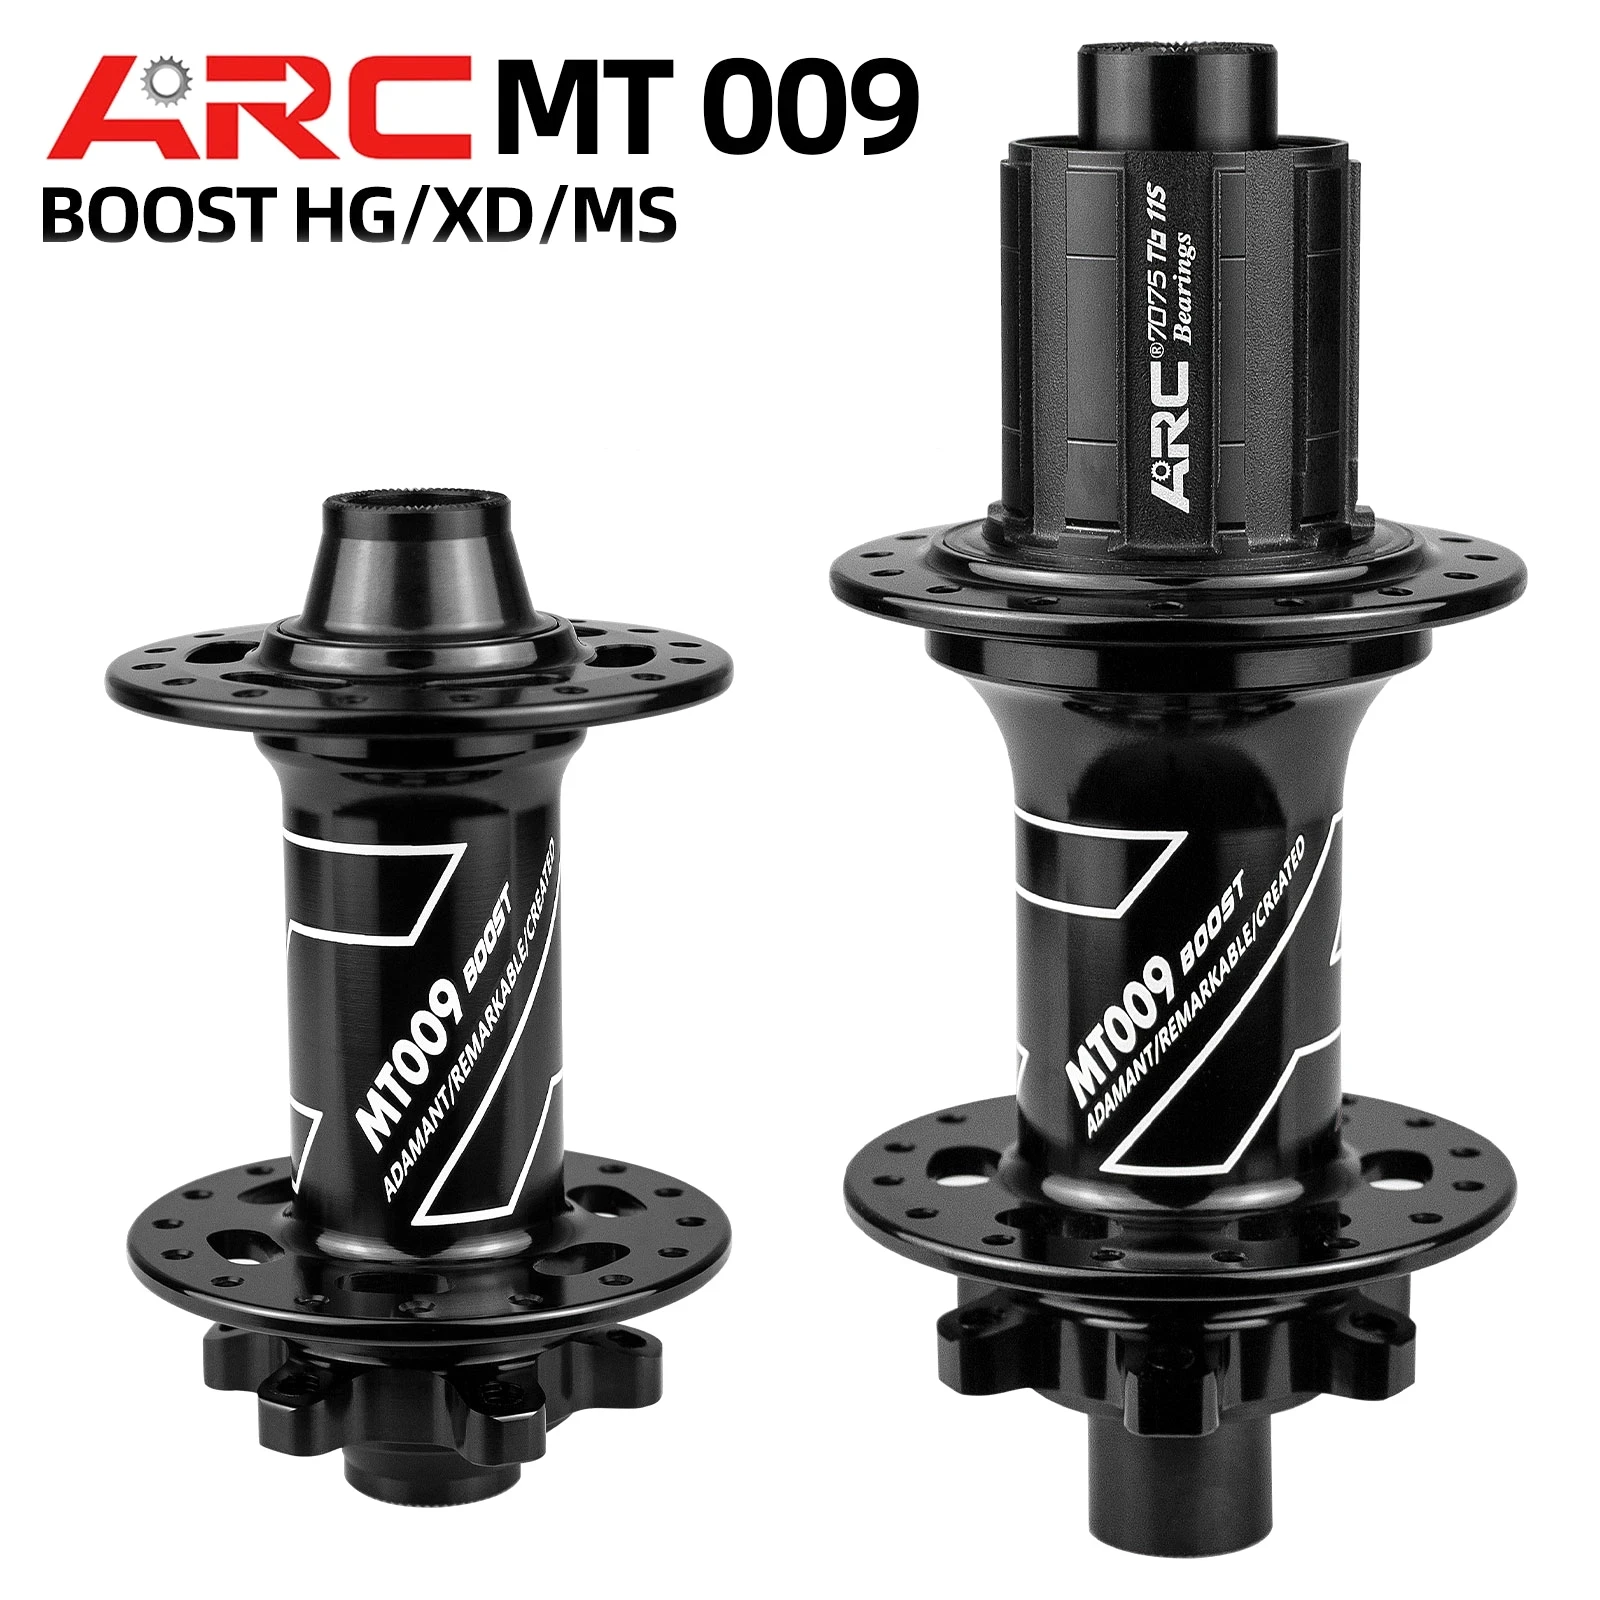 

ARC MT009 BOOST Front Rear Hub,6 Pawls 3 Theeth,Front 15*110 Rear 12*148 for K7 Micro Spline HG MS XD,MTB Bike Bicycle Hubs